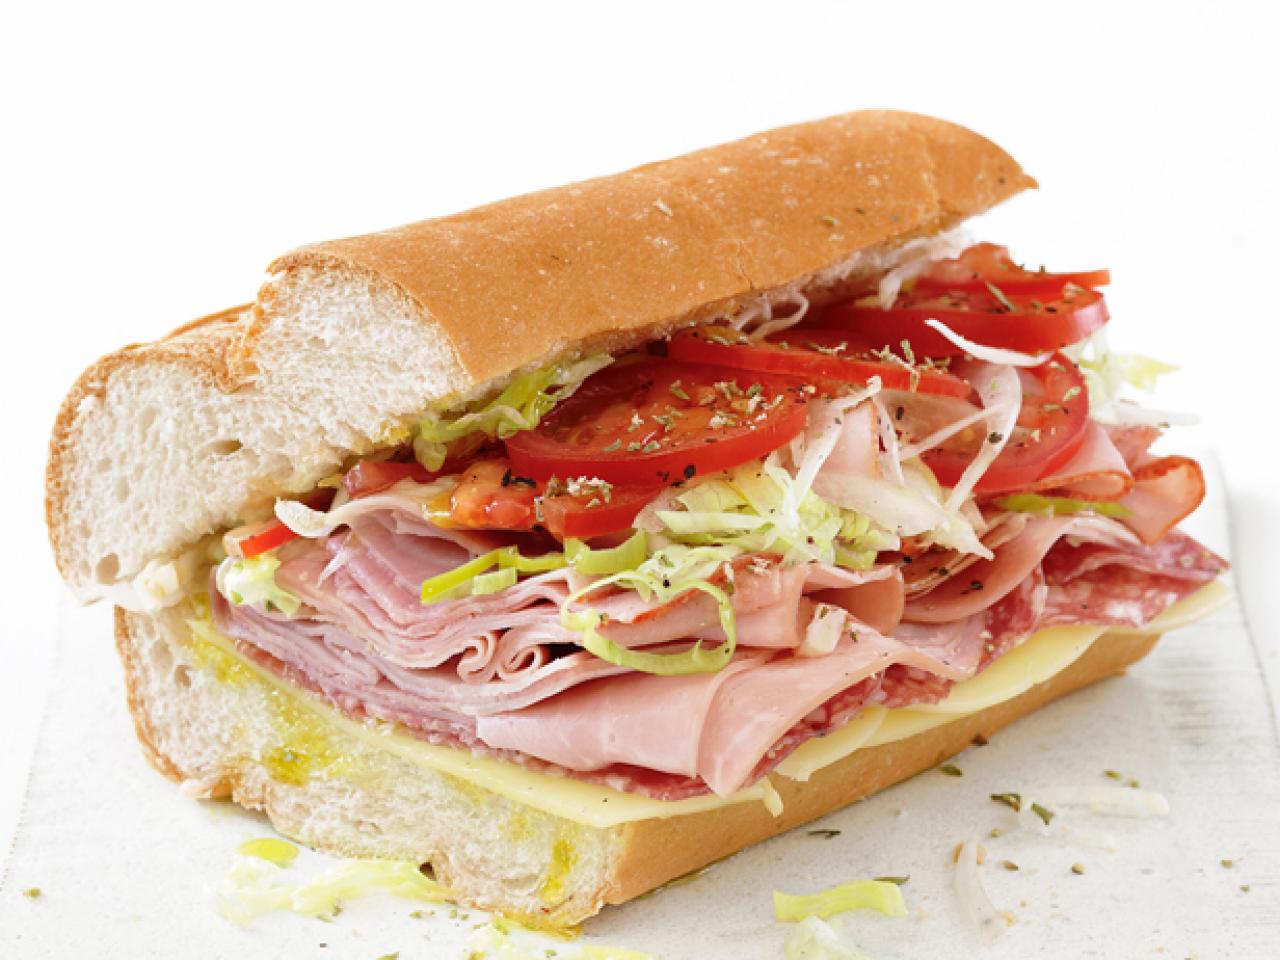 Baked Italian Hoagie Recipe - a quick and easy sandwich recipe.